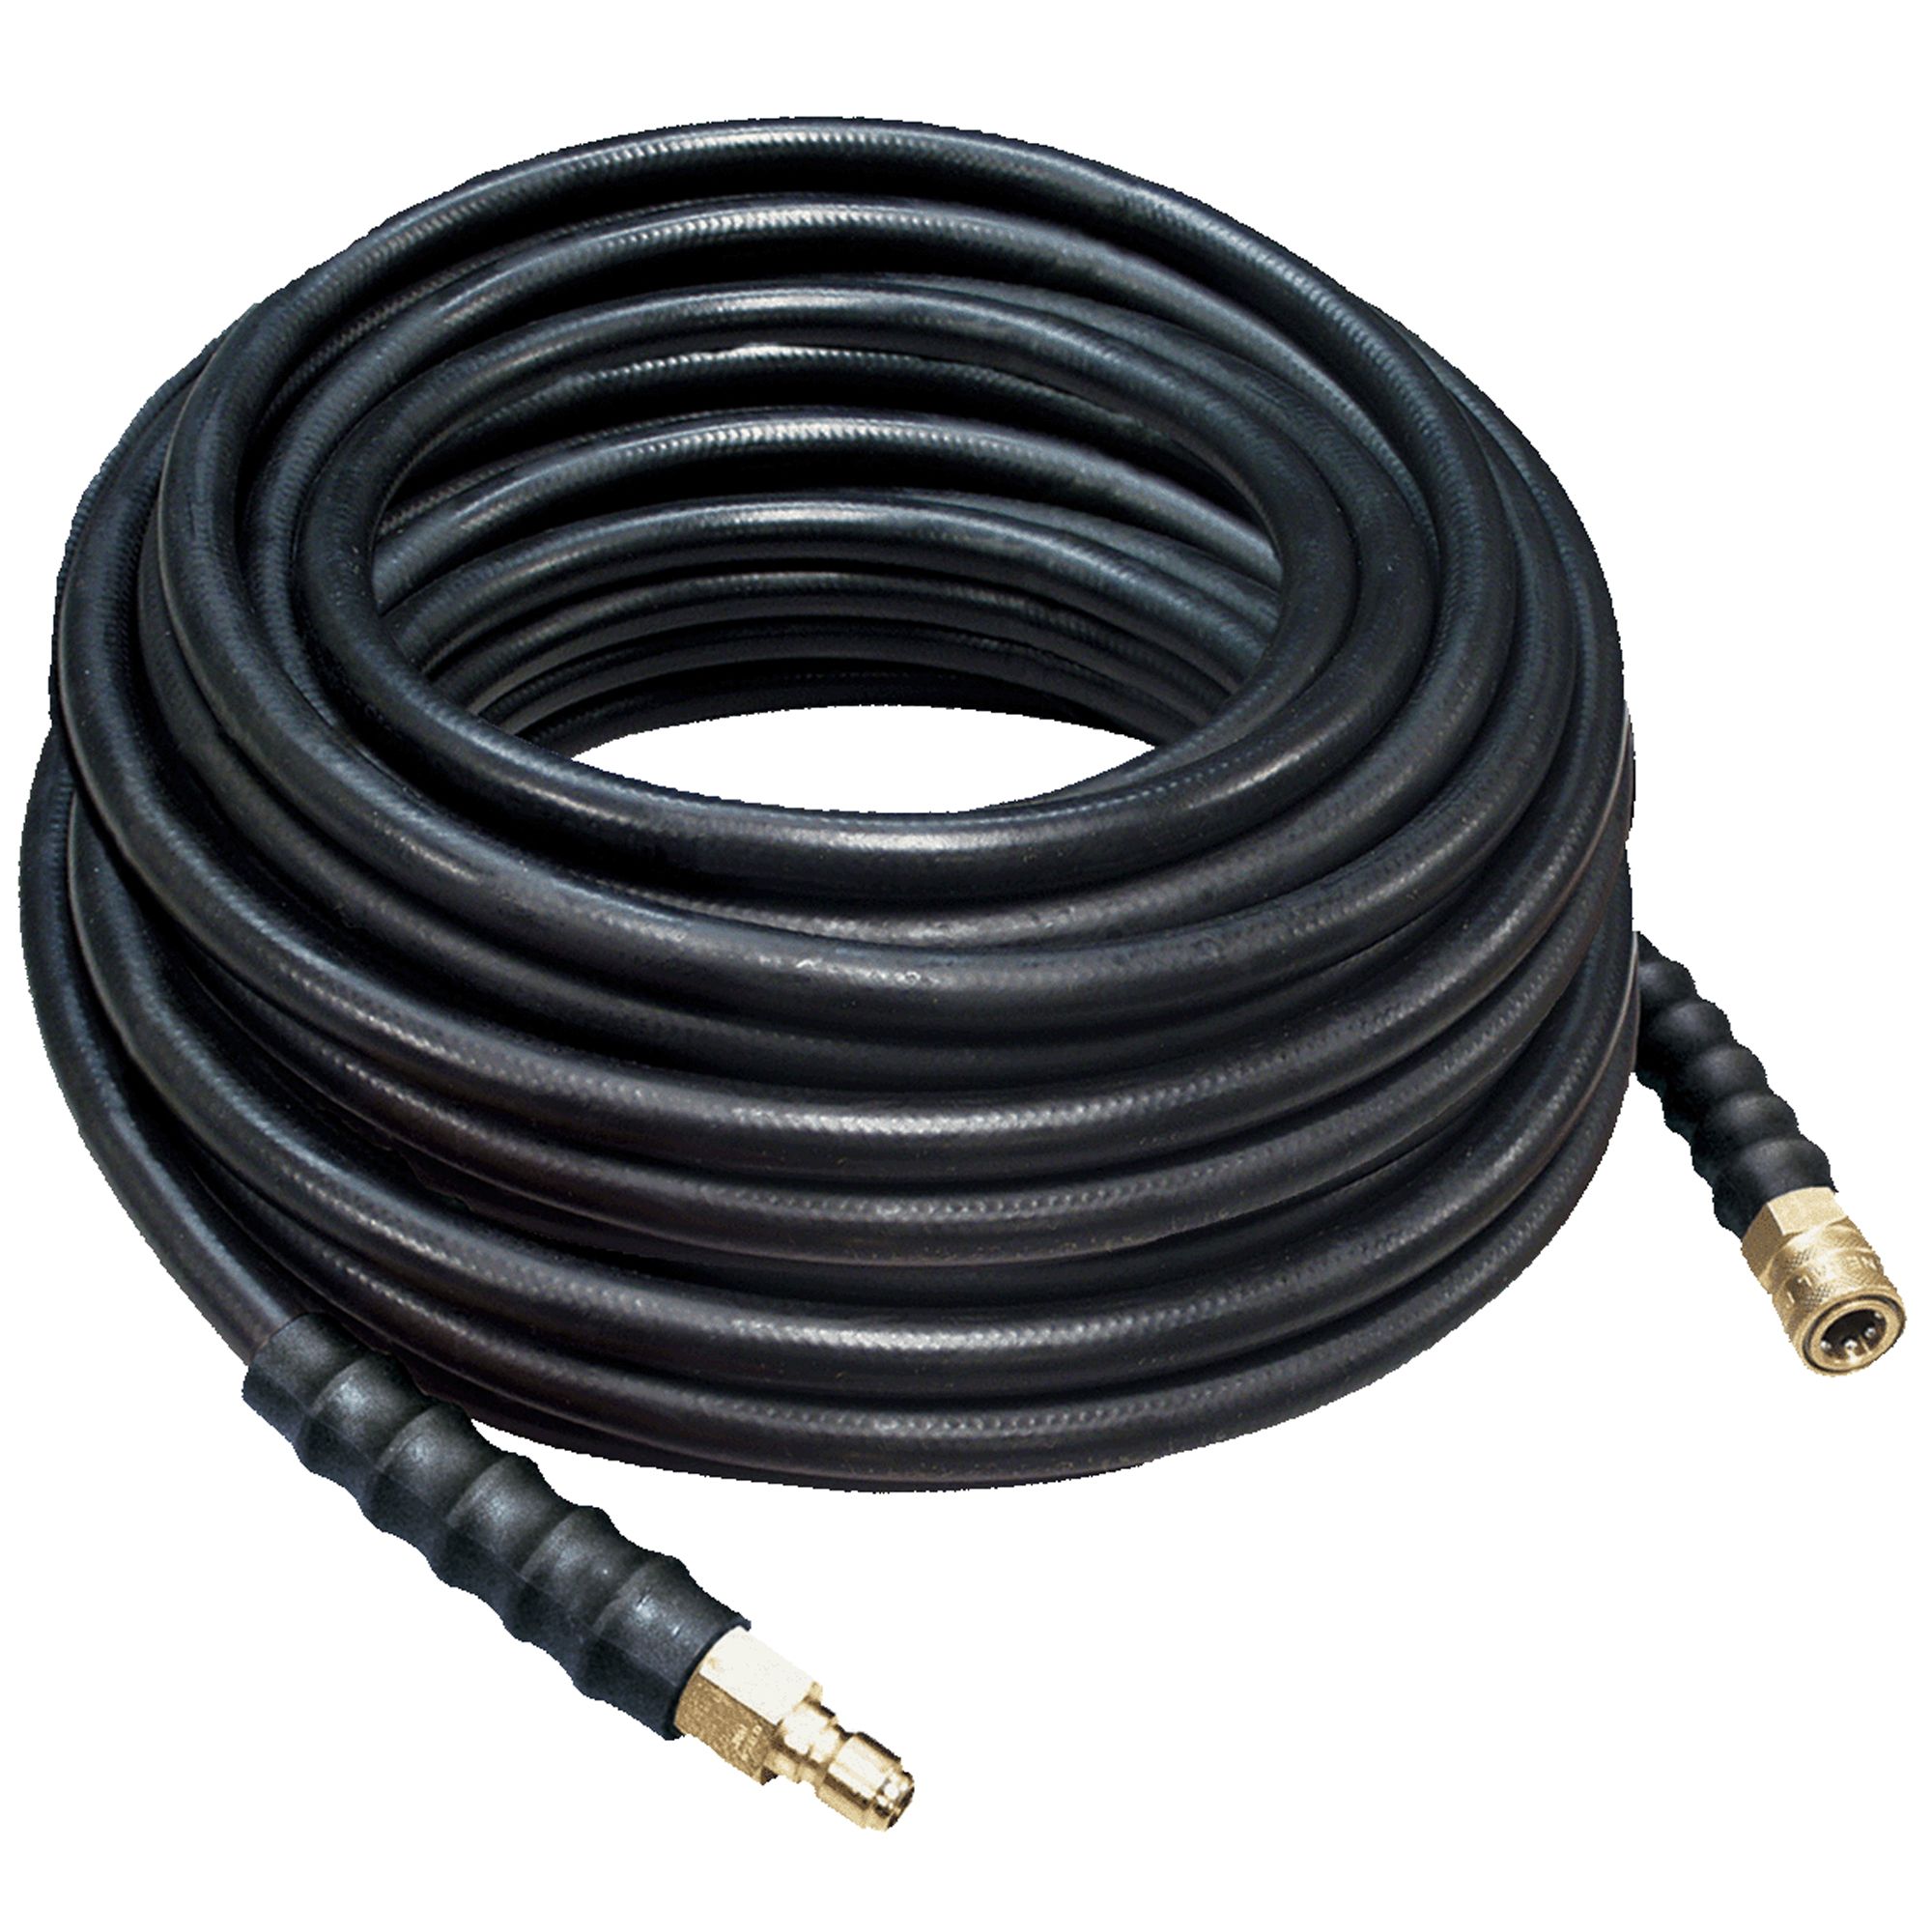 Universal by Apache 50' Rubber QD Pressure Washer Hose